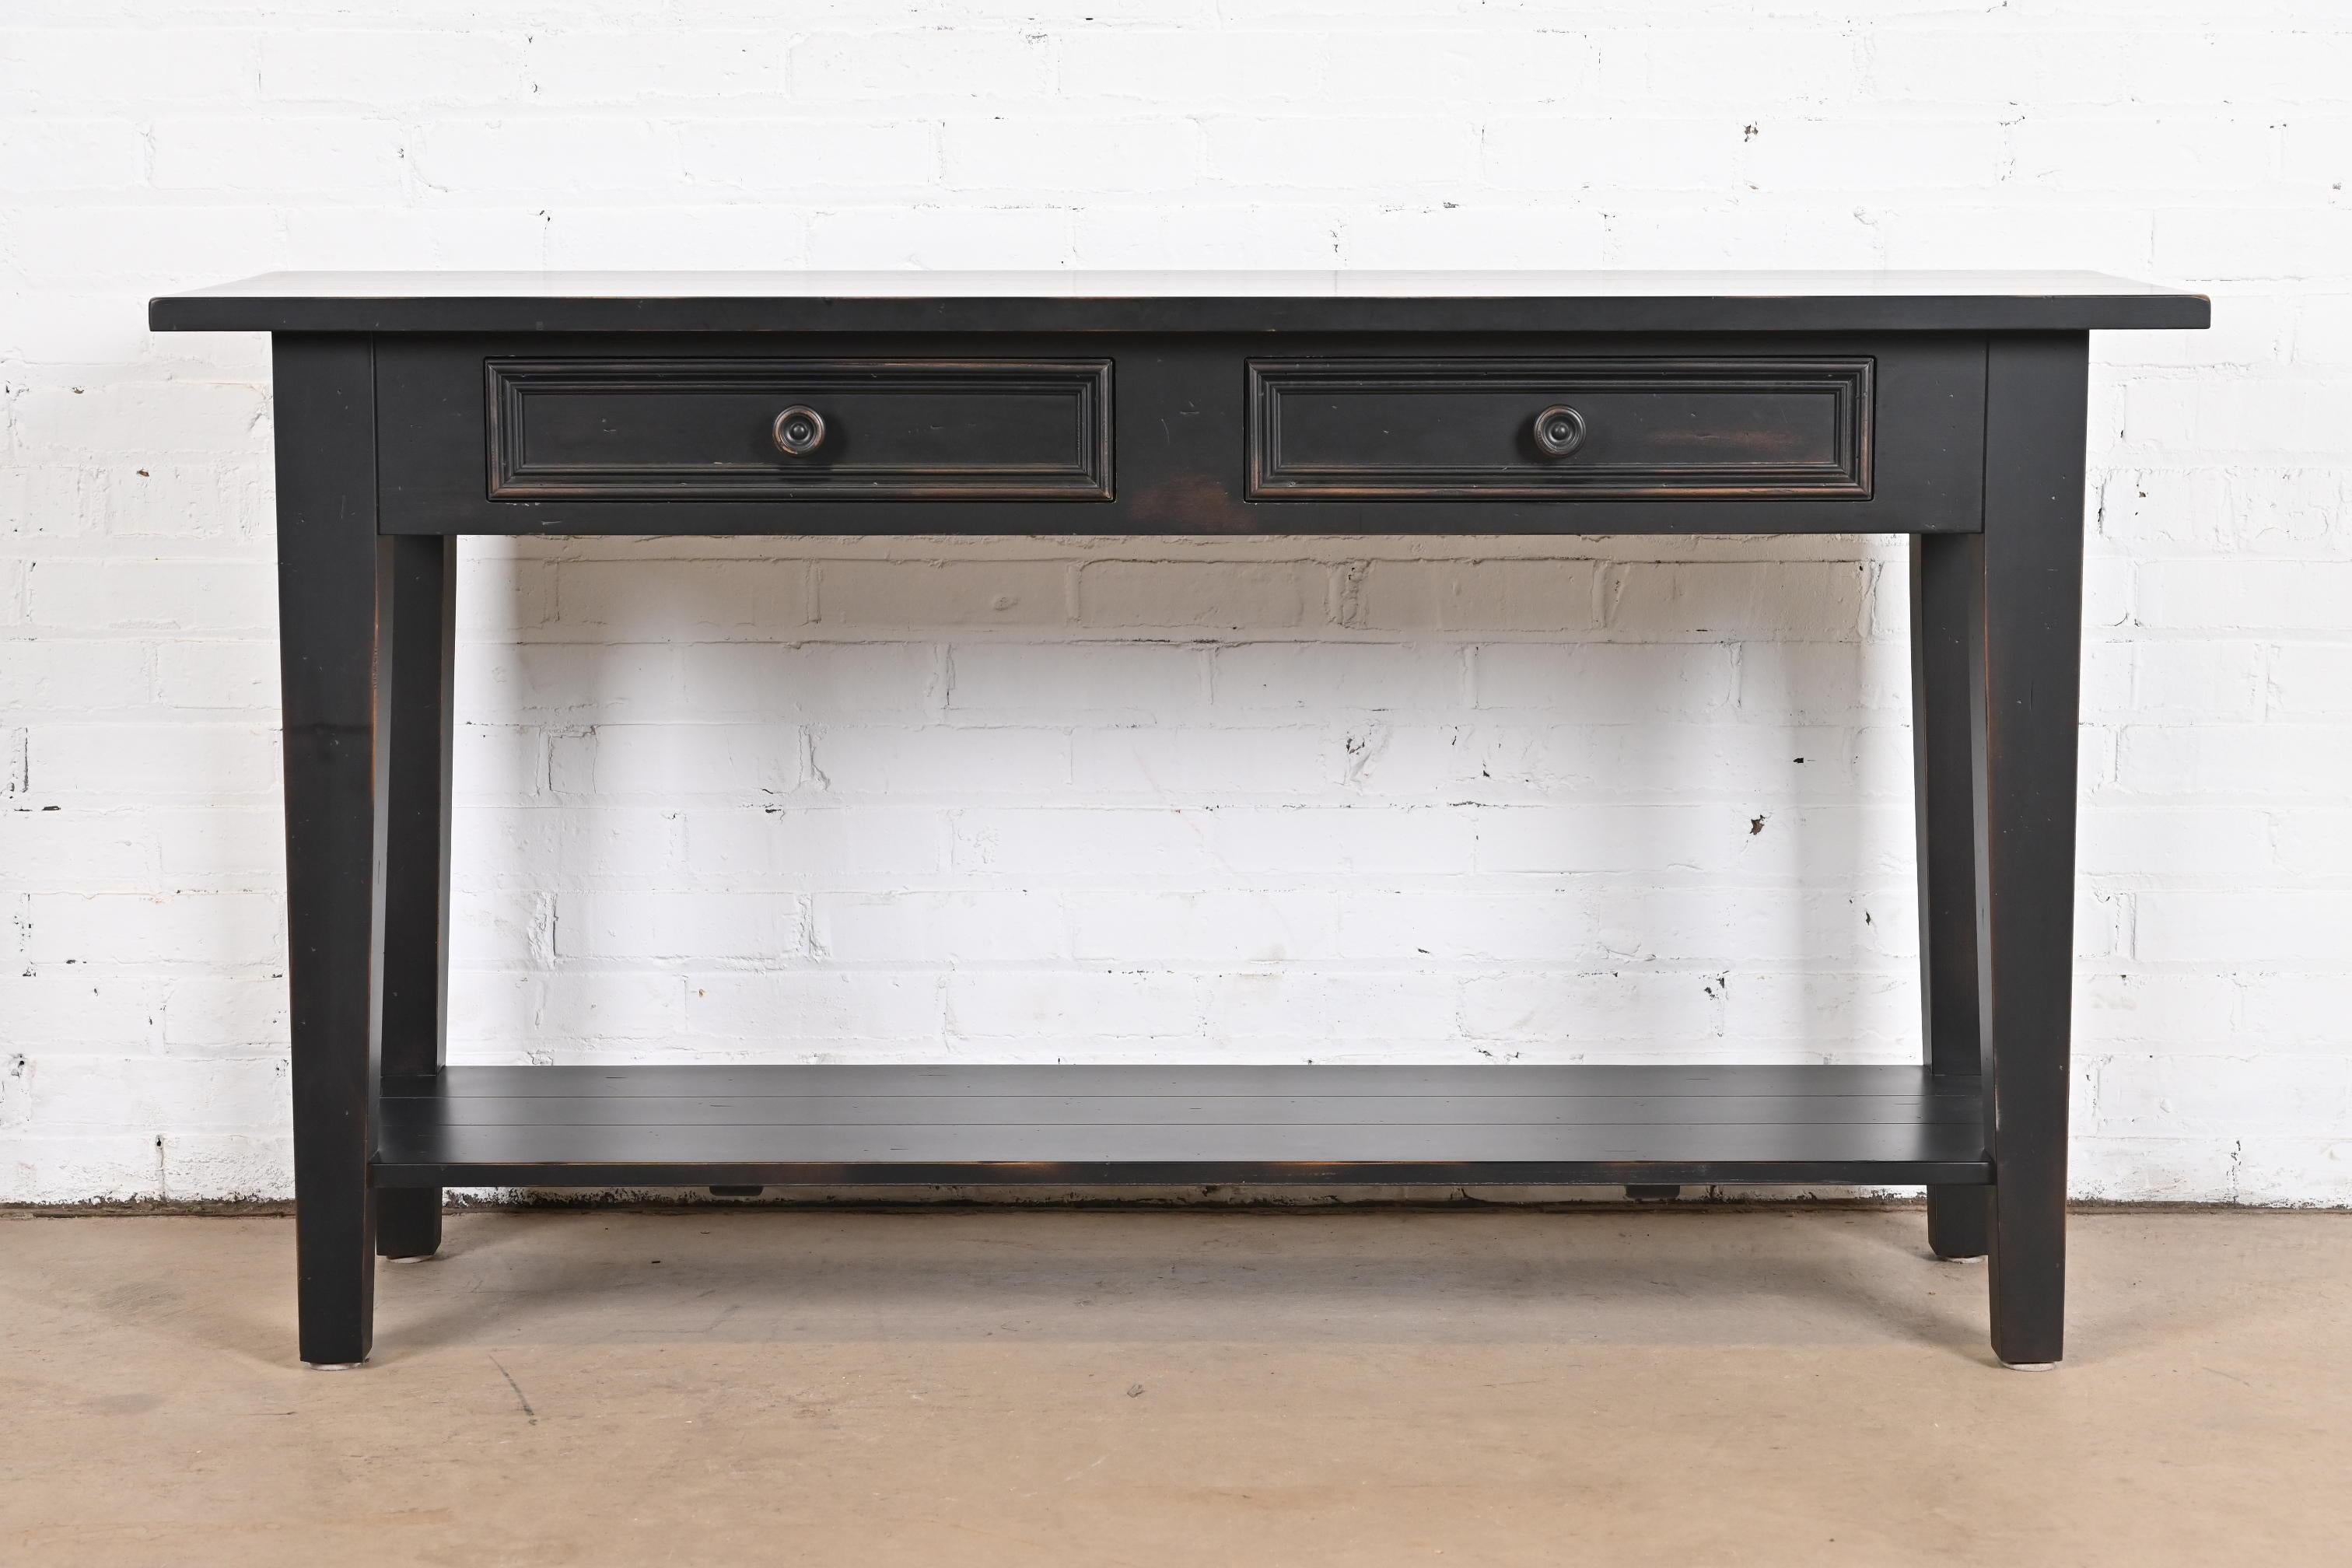 American Shaker Style Ebonized Maple Sideboard Buffet Server or Console Table For Sale